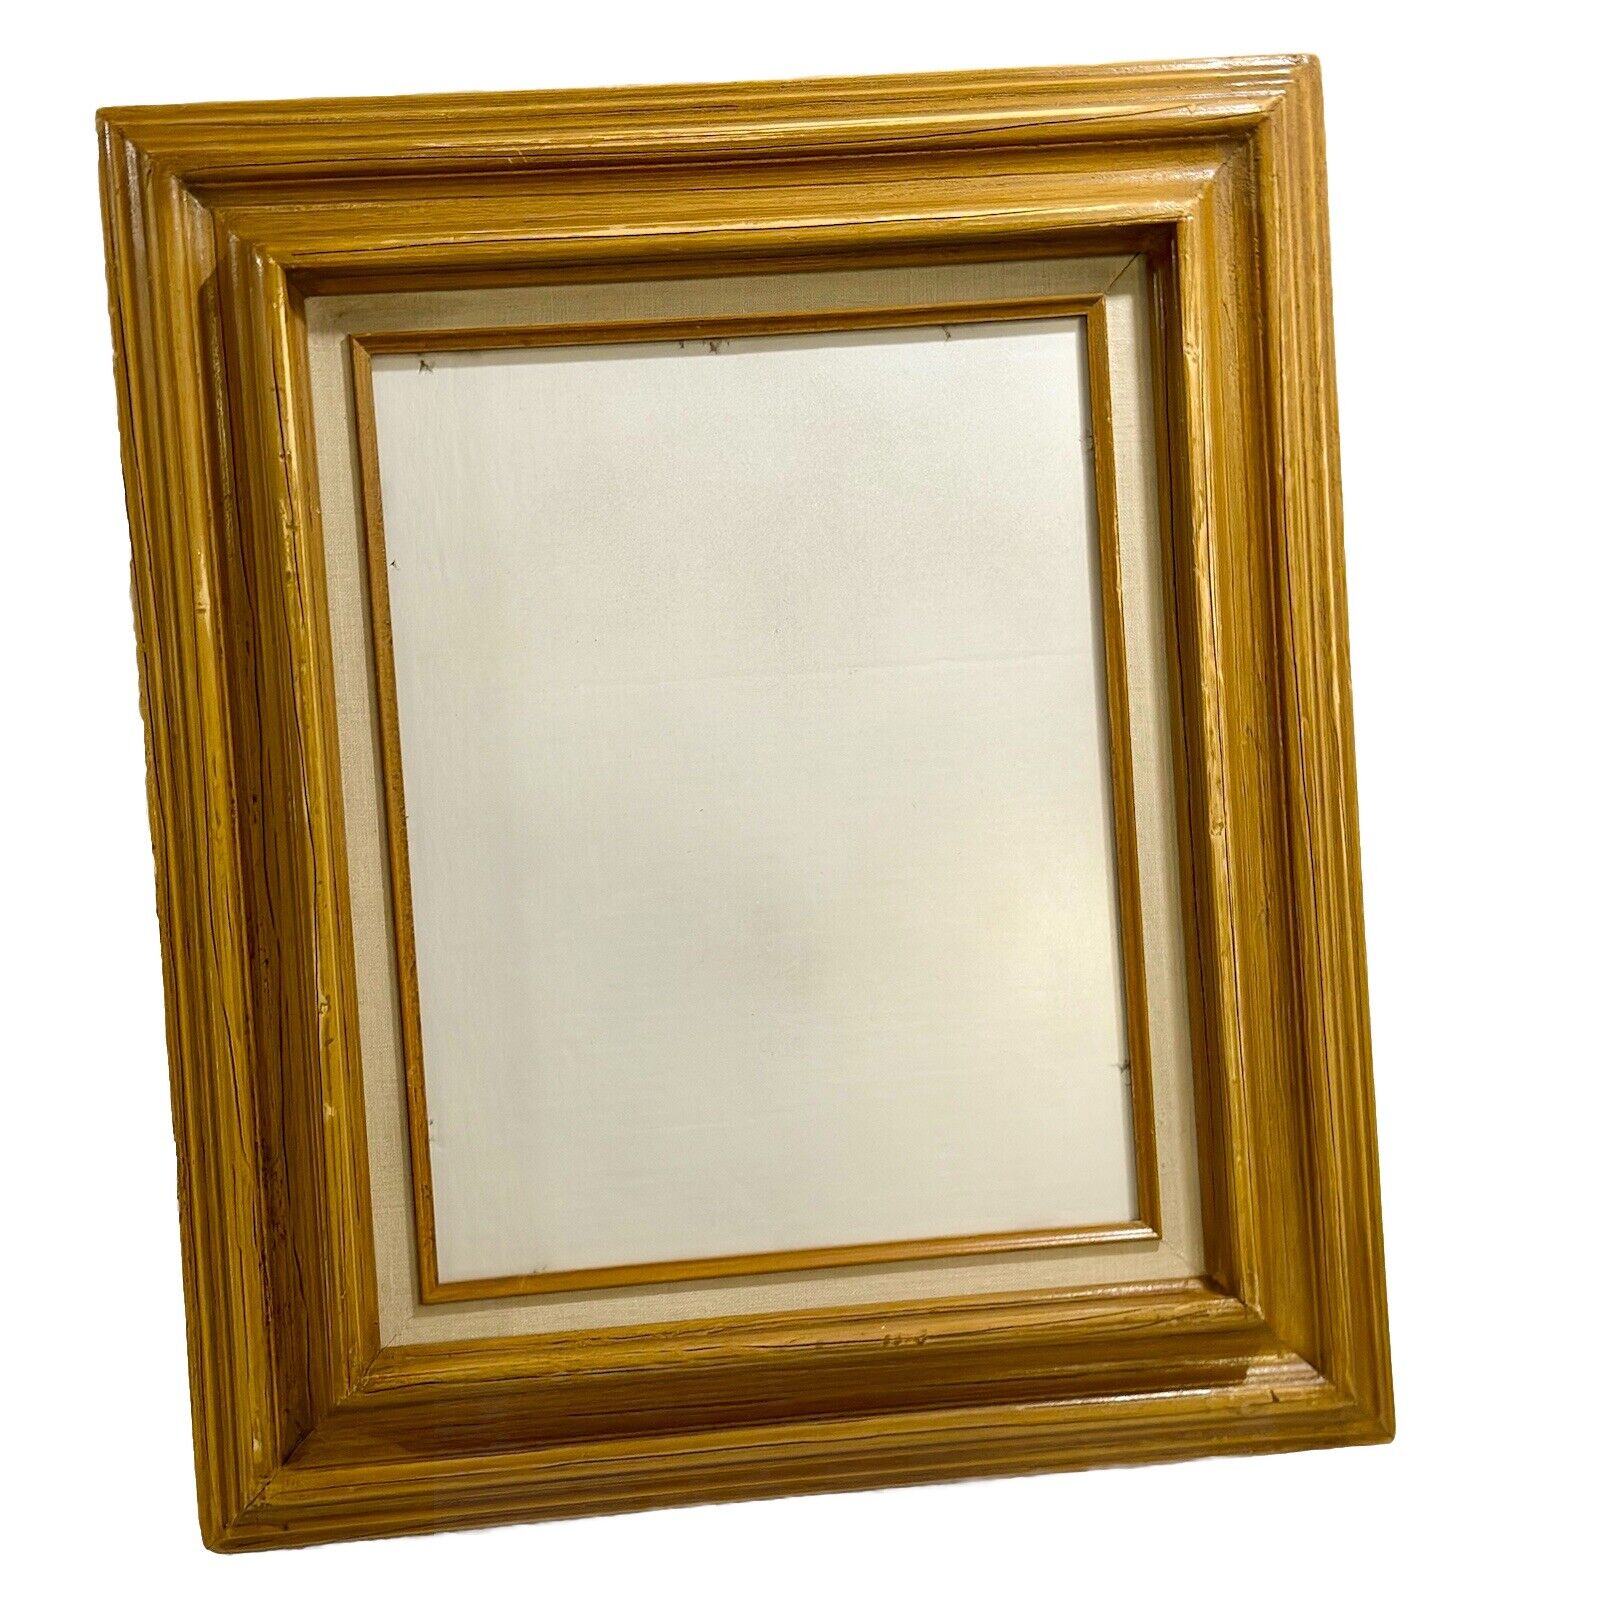 Vintage Solid Wood Layered Picture Frame Made In Mexico